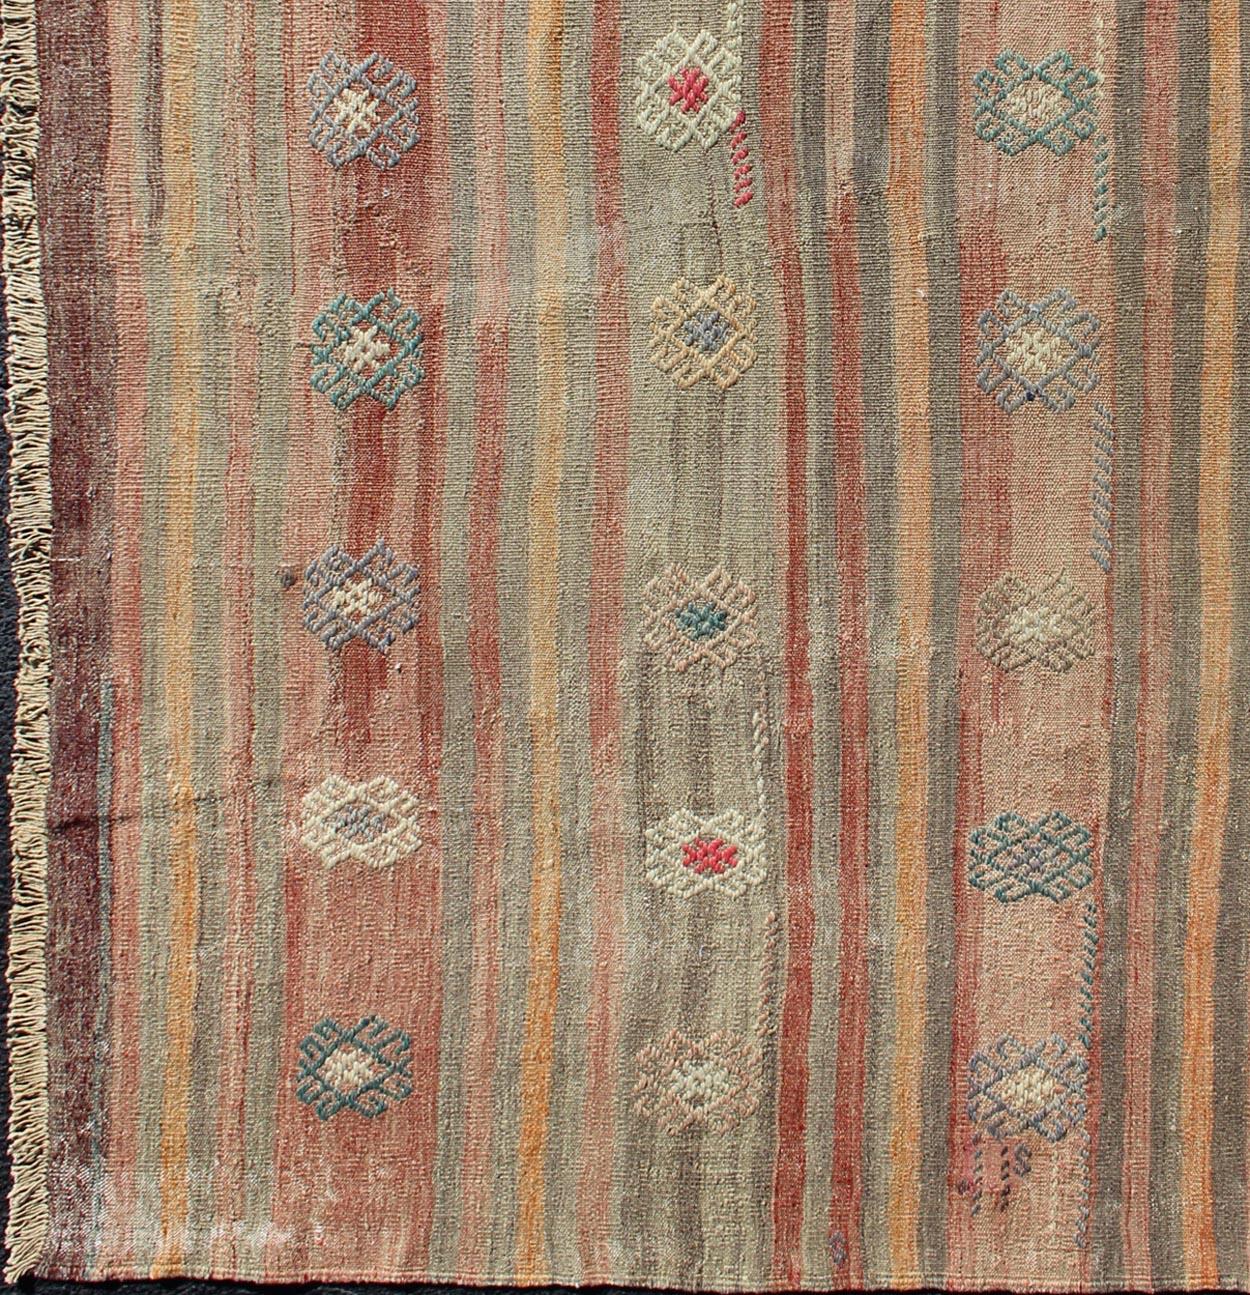 Turkish vintage flat-woven Kilim with repeating pattern, rug TU-NED-604, country of origin / type: Turkey / Kilim, circa 1950.

This flat-woven Kilim rug displays an enchanting design of repeating starburst motifs, rendered in orange, burnt red,